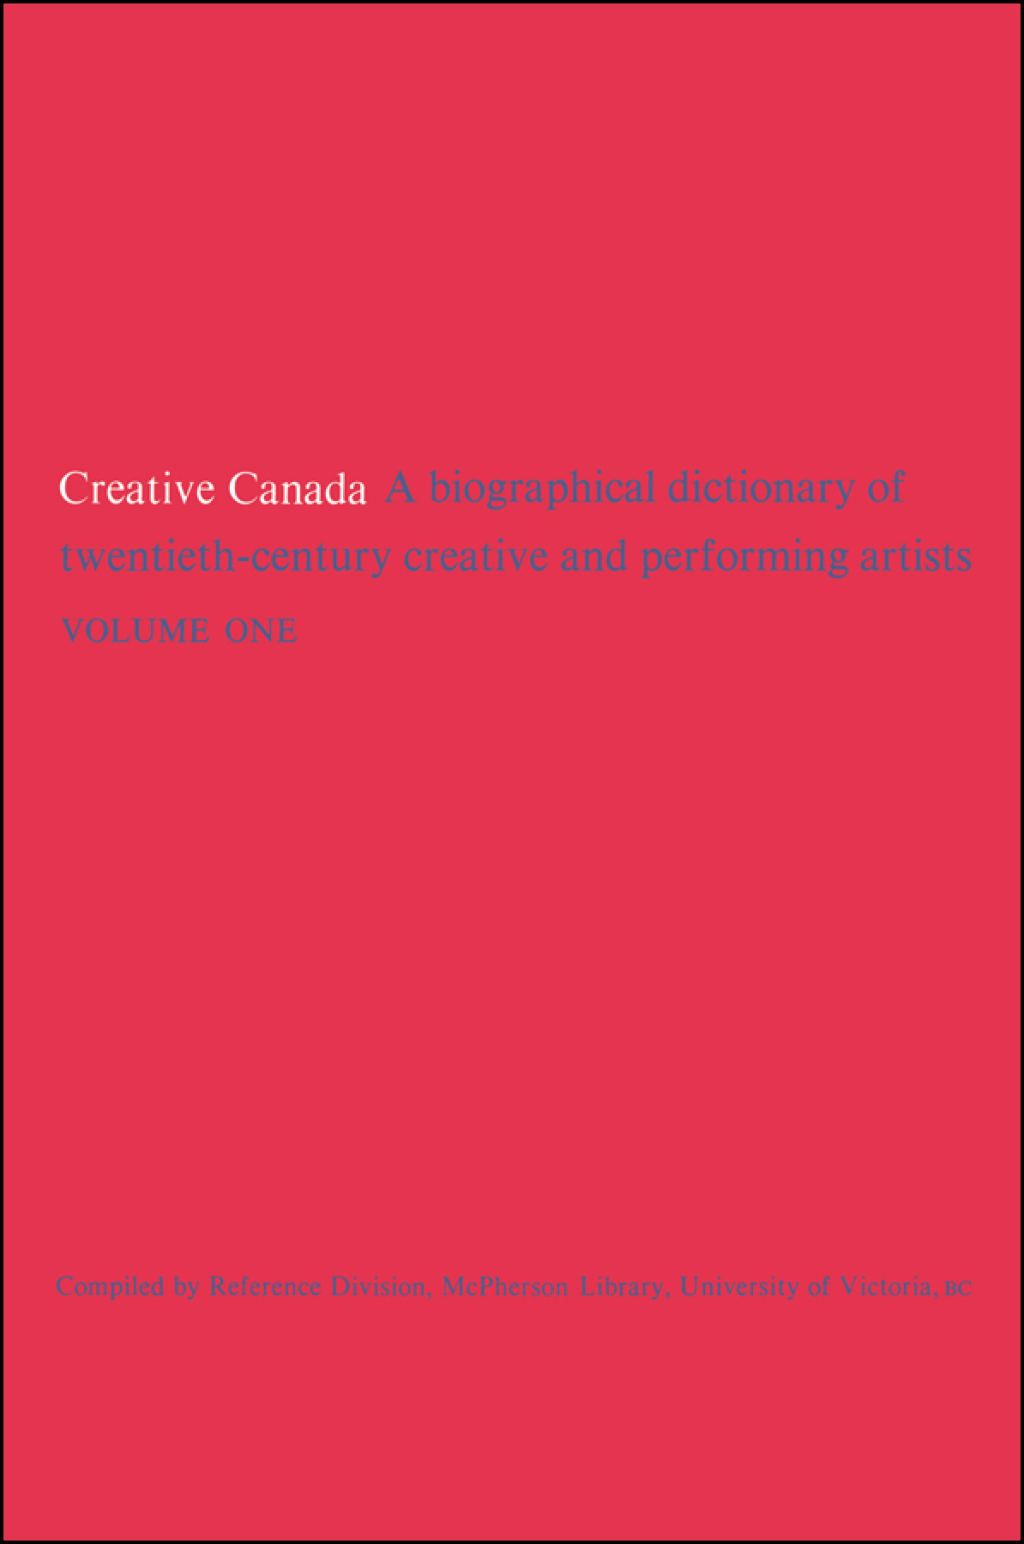 Creative Canada (eBook) - Reference Division,  McPherson Library,  University of Victoria